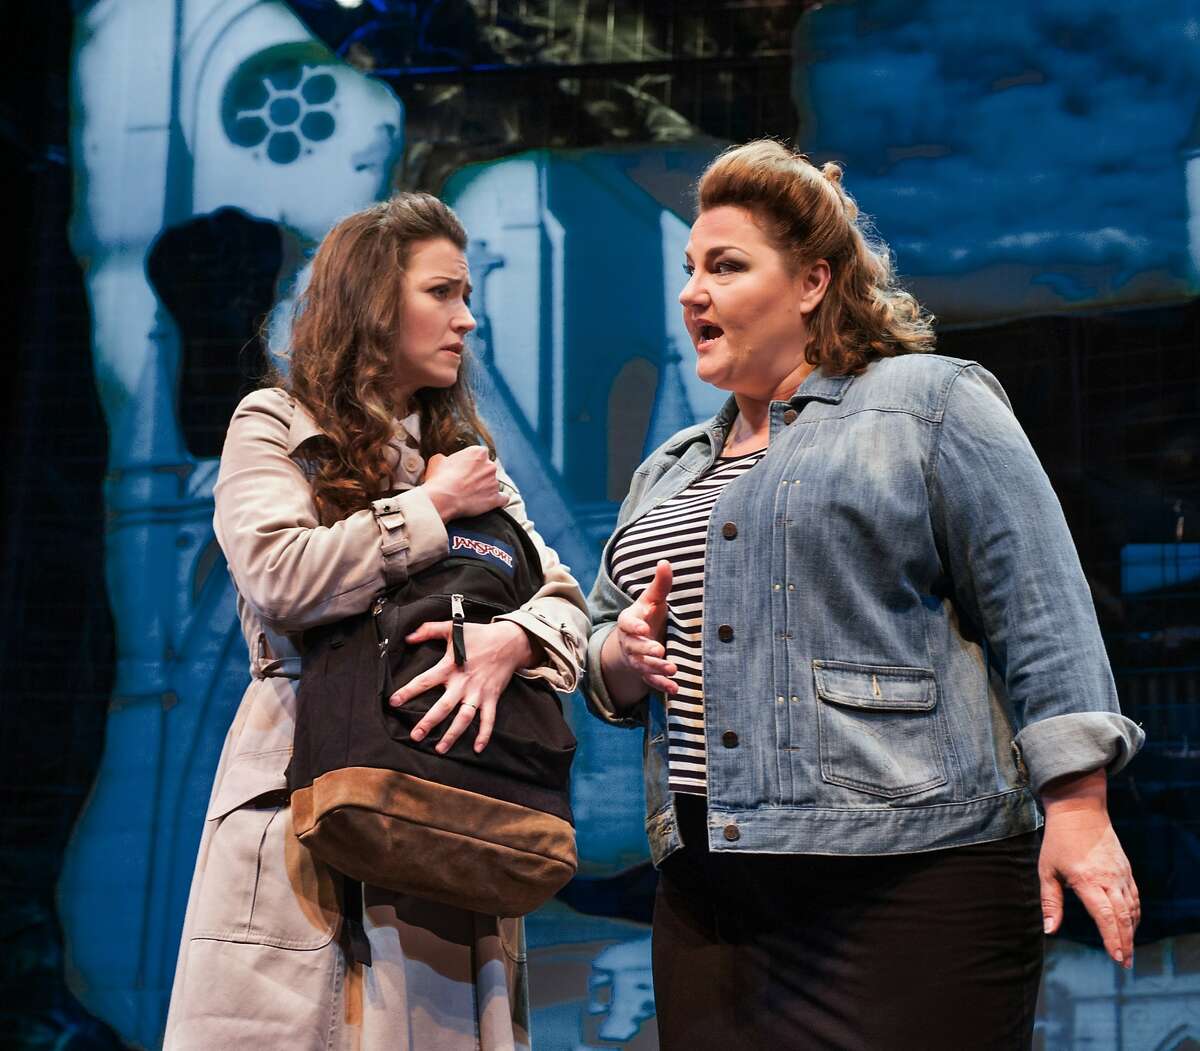 Anna Noggle (l.) and Catherine Cook in "Anya17" at Opera Parallèle Opera Parallele's 2014 production of Anya 17. Photo: Steve DiBartolomeo, Westside Studio Images.